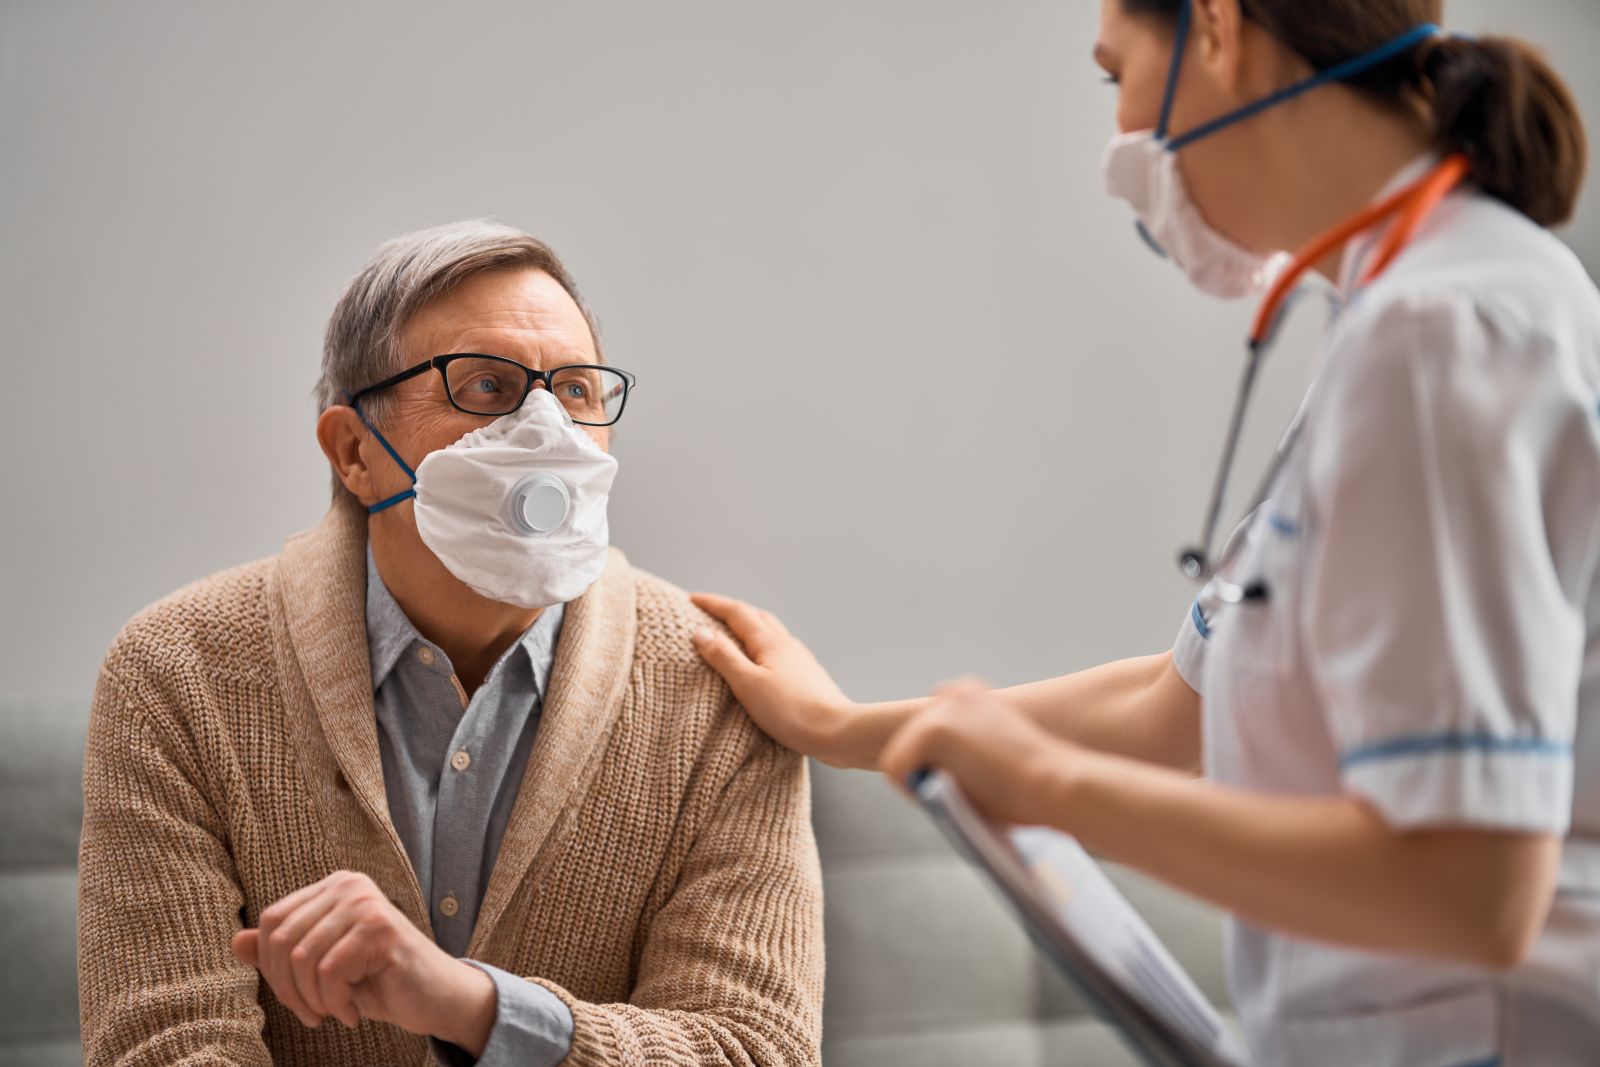 Patient and doctor talking while wearing facemasks